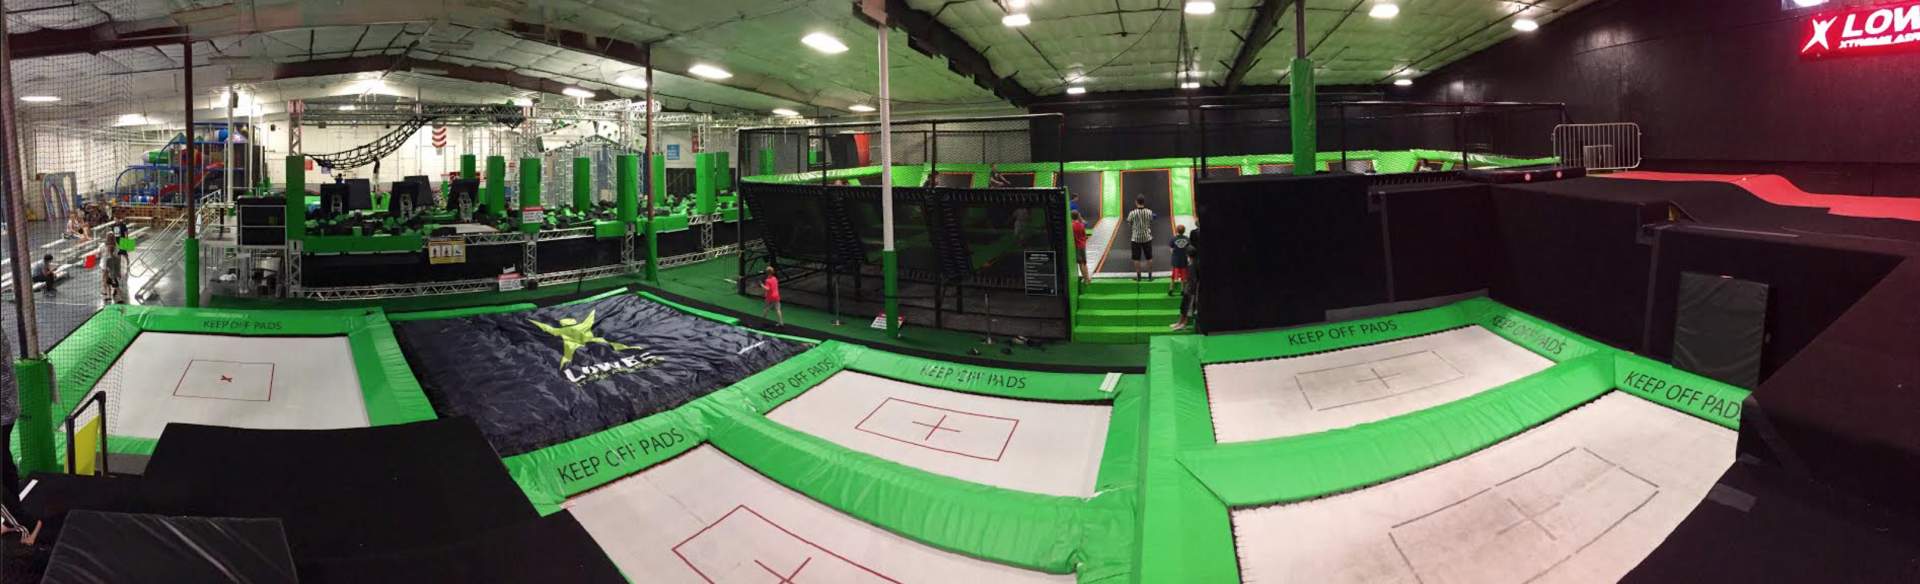 Trampolines For Sale | Find The Best Trampoline And Select Your Style